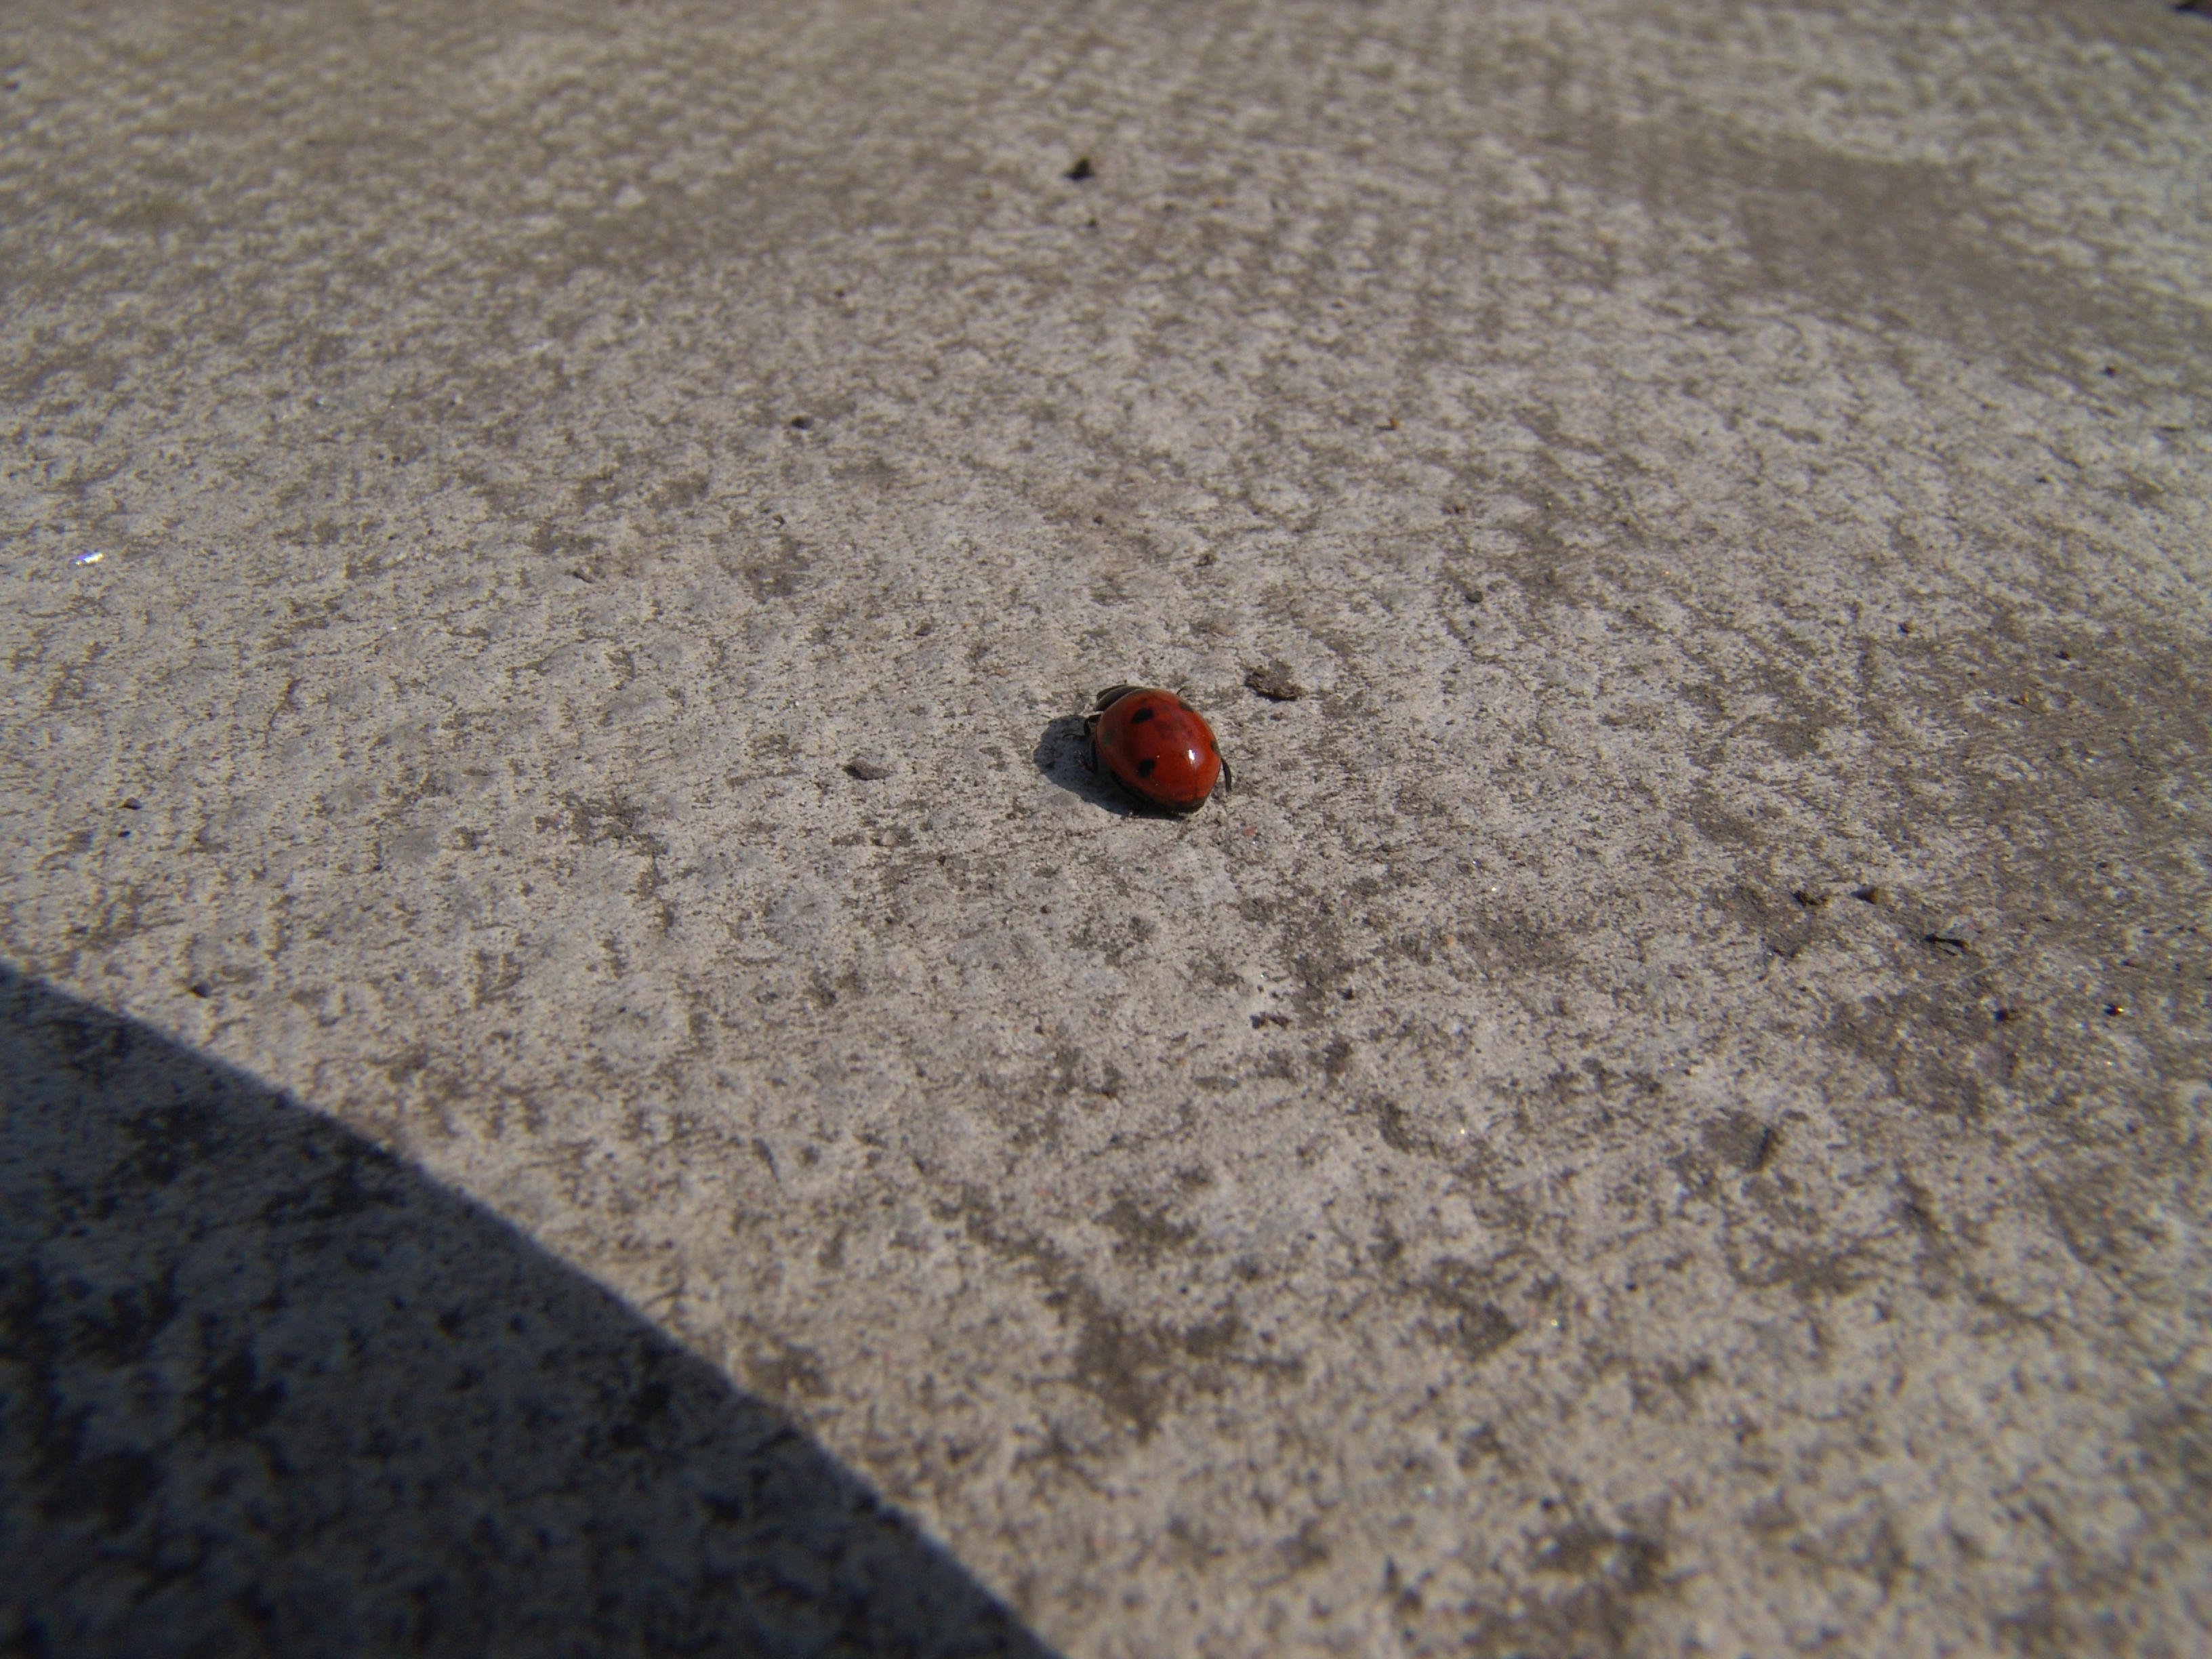 Natural Science: ladybird-red-with-black-spots-on-concrete ...